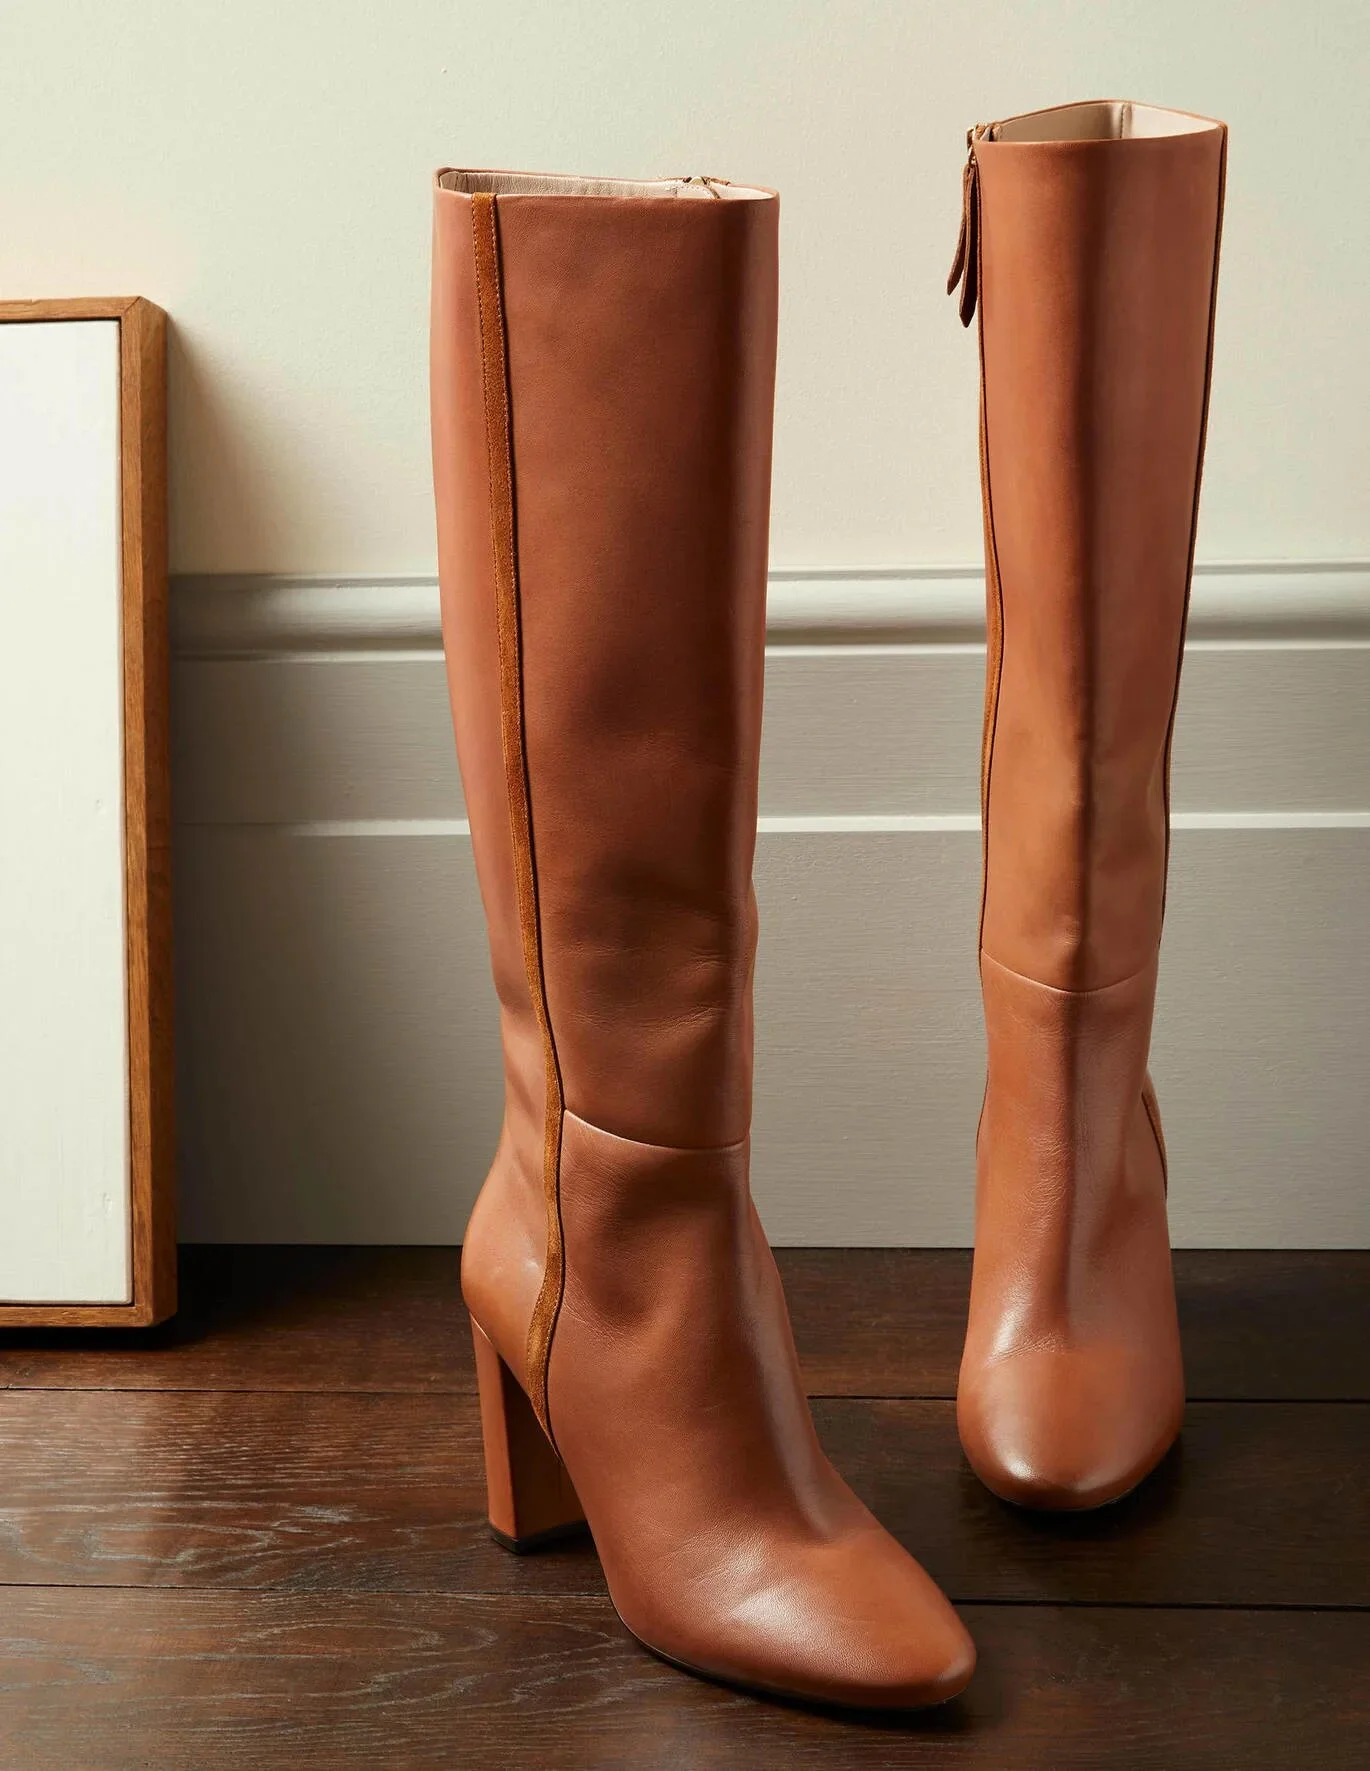 replace Tablet Air mail Boden + Knee High Leather Boots Tan